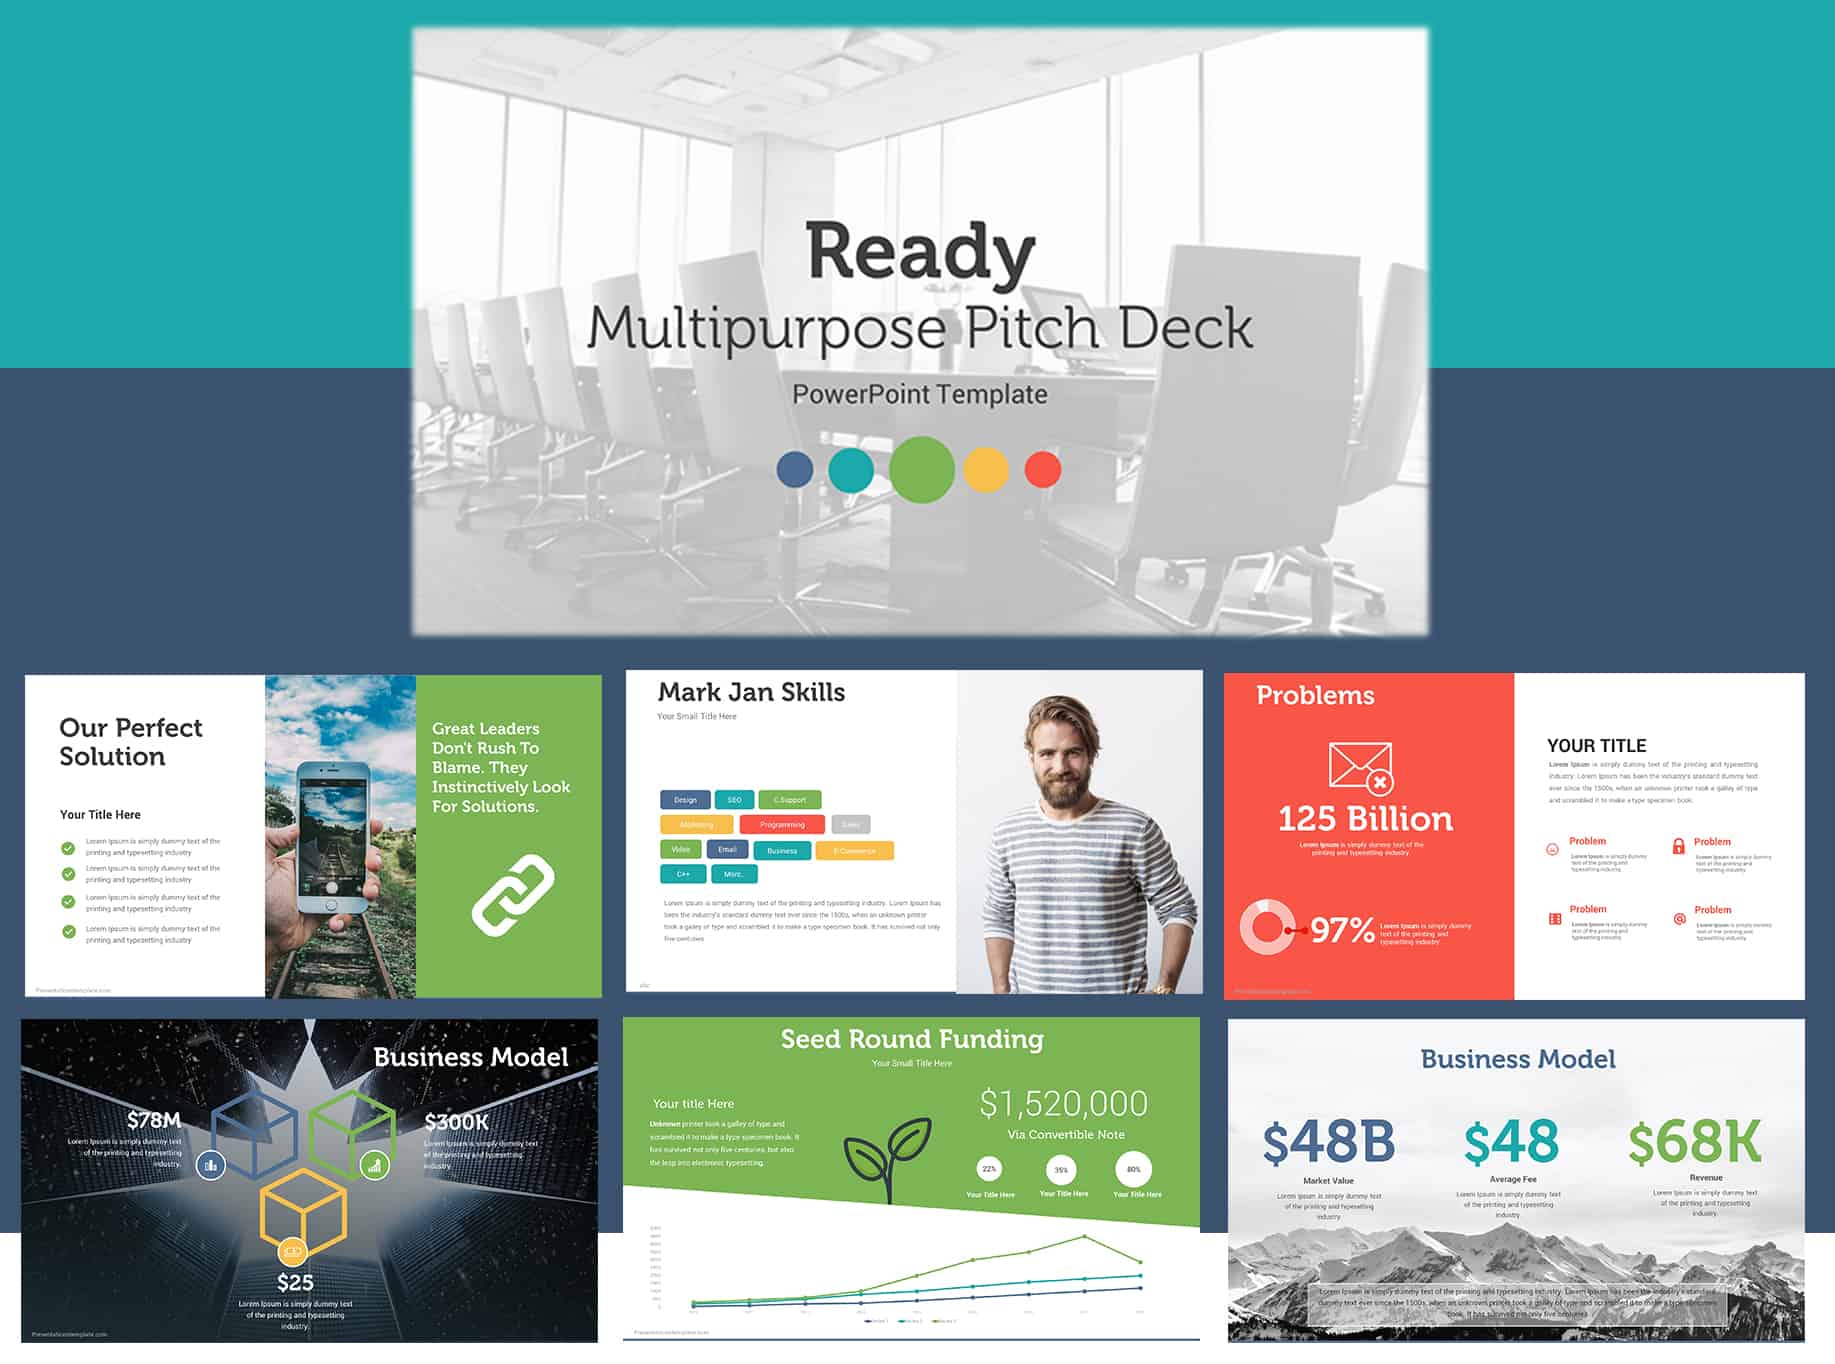 Best Pitch Deck Template Powerpoint, Pitch Deck Template Powerpoint, Pitch Deck Powerpoint Template Download, Perfect Pitch Deck Template